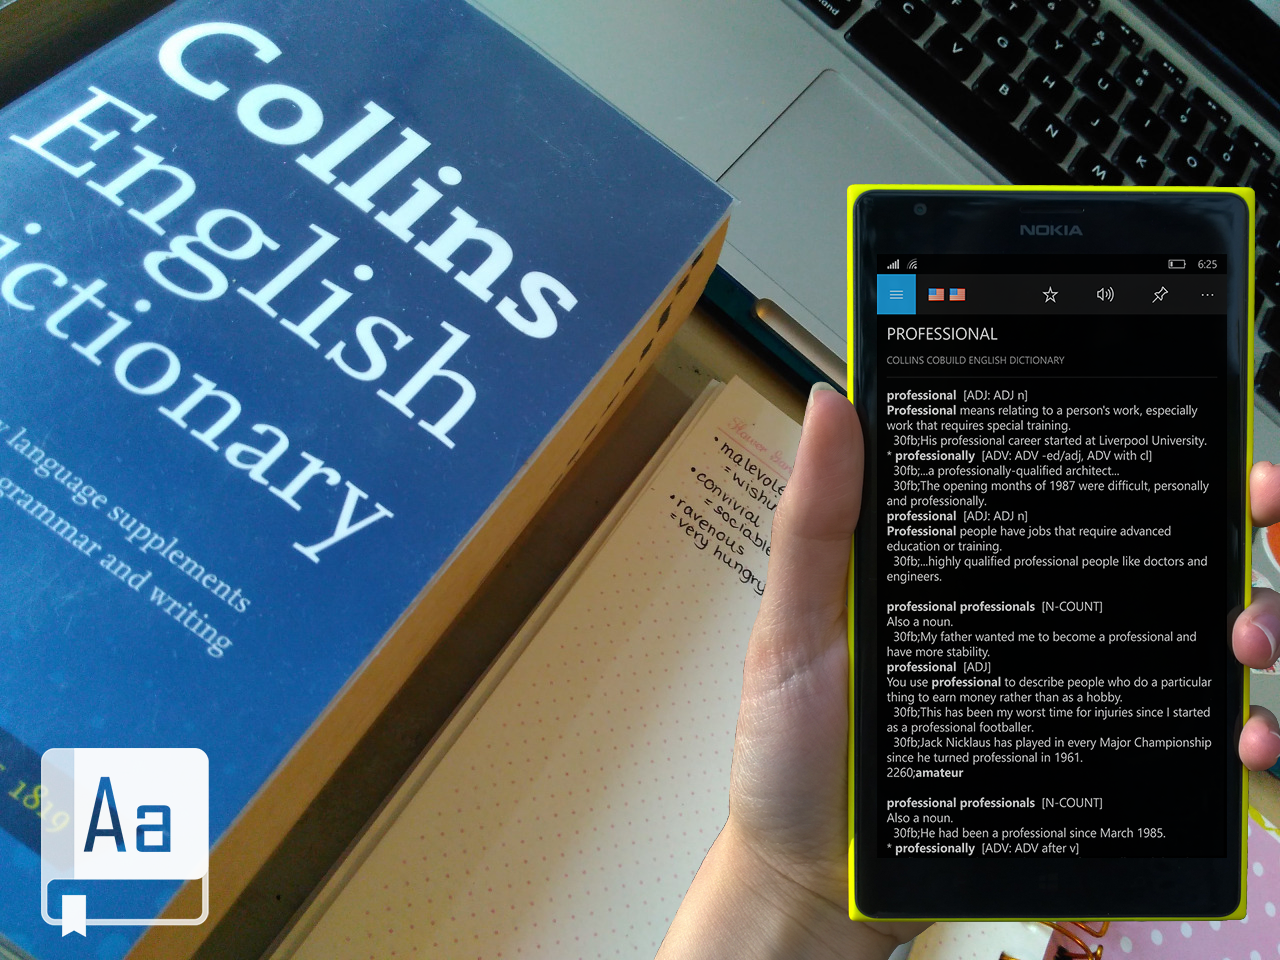 Collins English Dictionary For Nokia Mobile Free Download